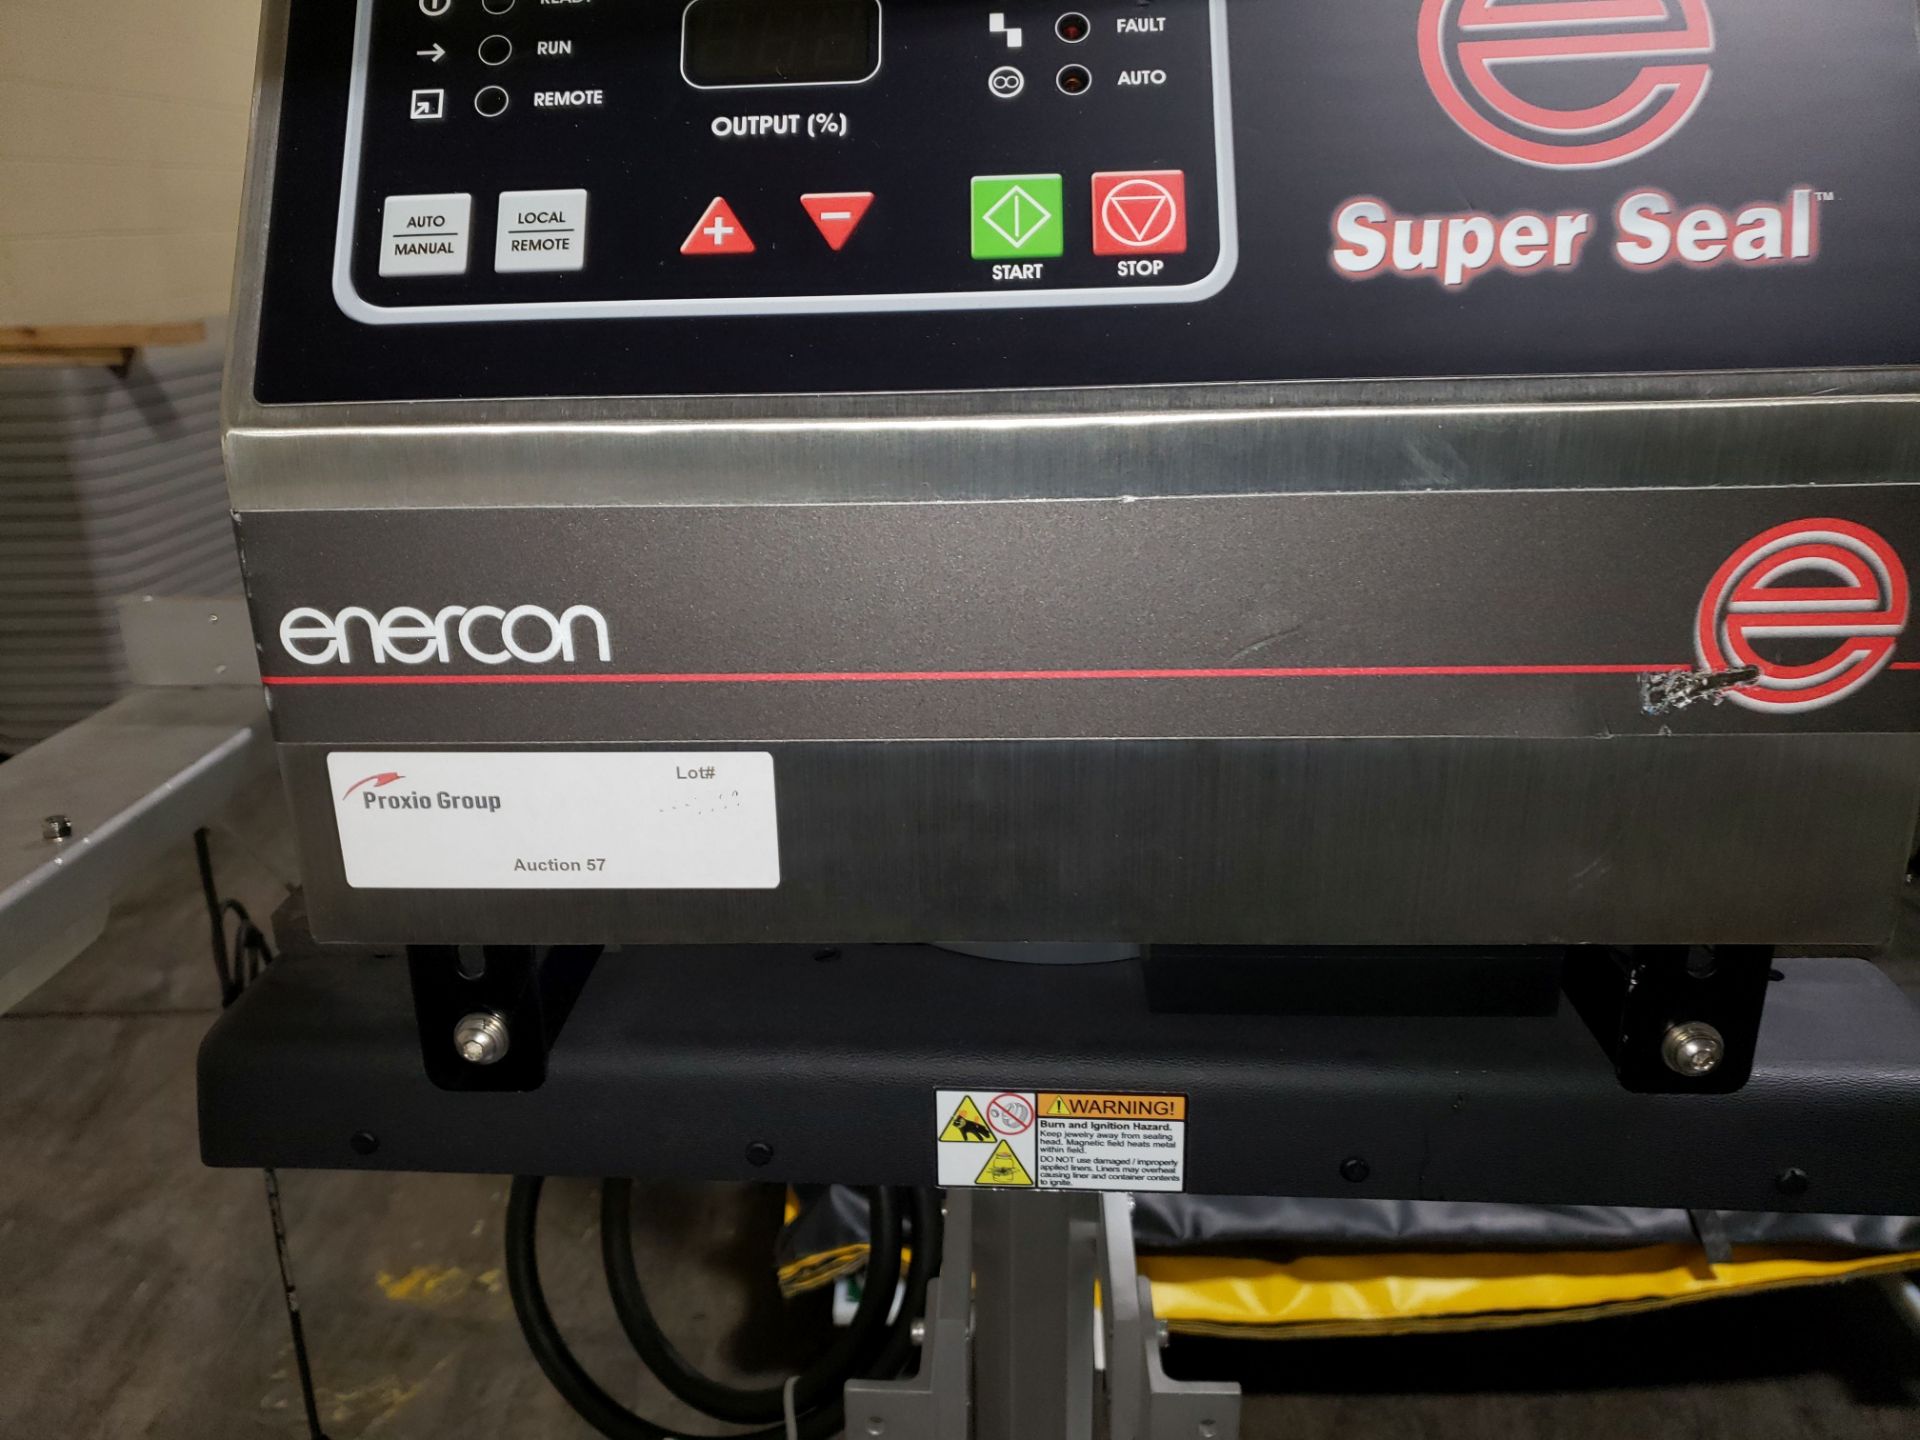 ENERCON SUPERSEAL 100 INDUCTION SEALER, MODEL LM5022-272, 208 VOLTS - Image 2 of 8